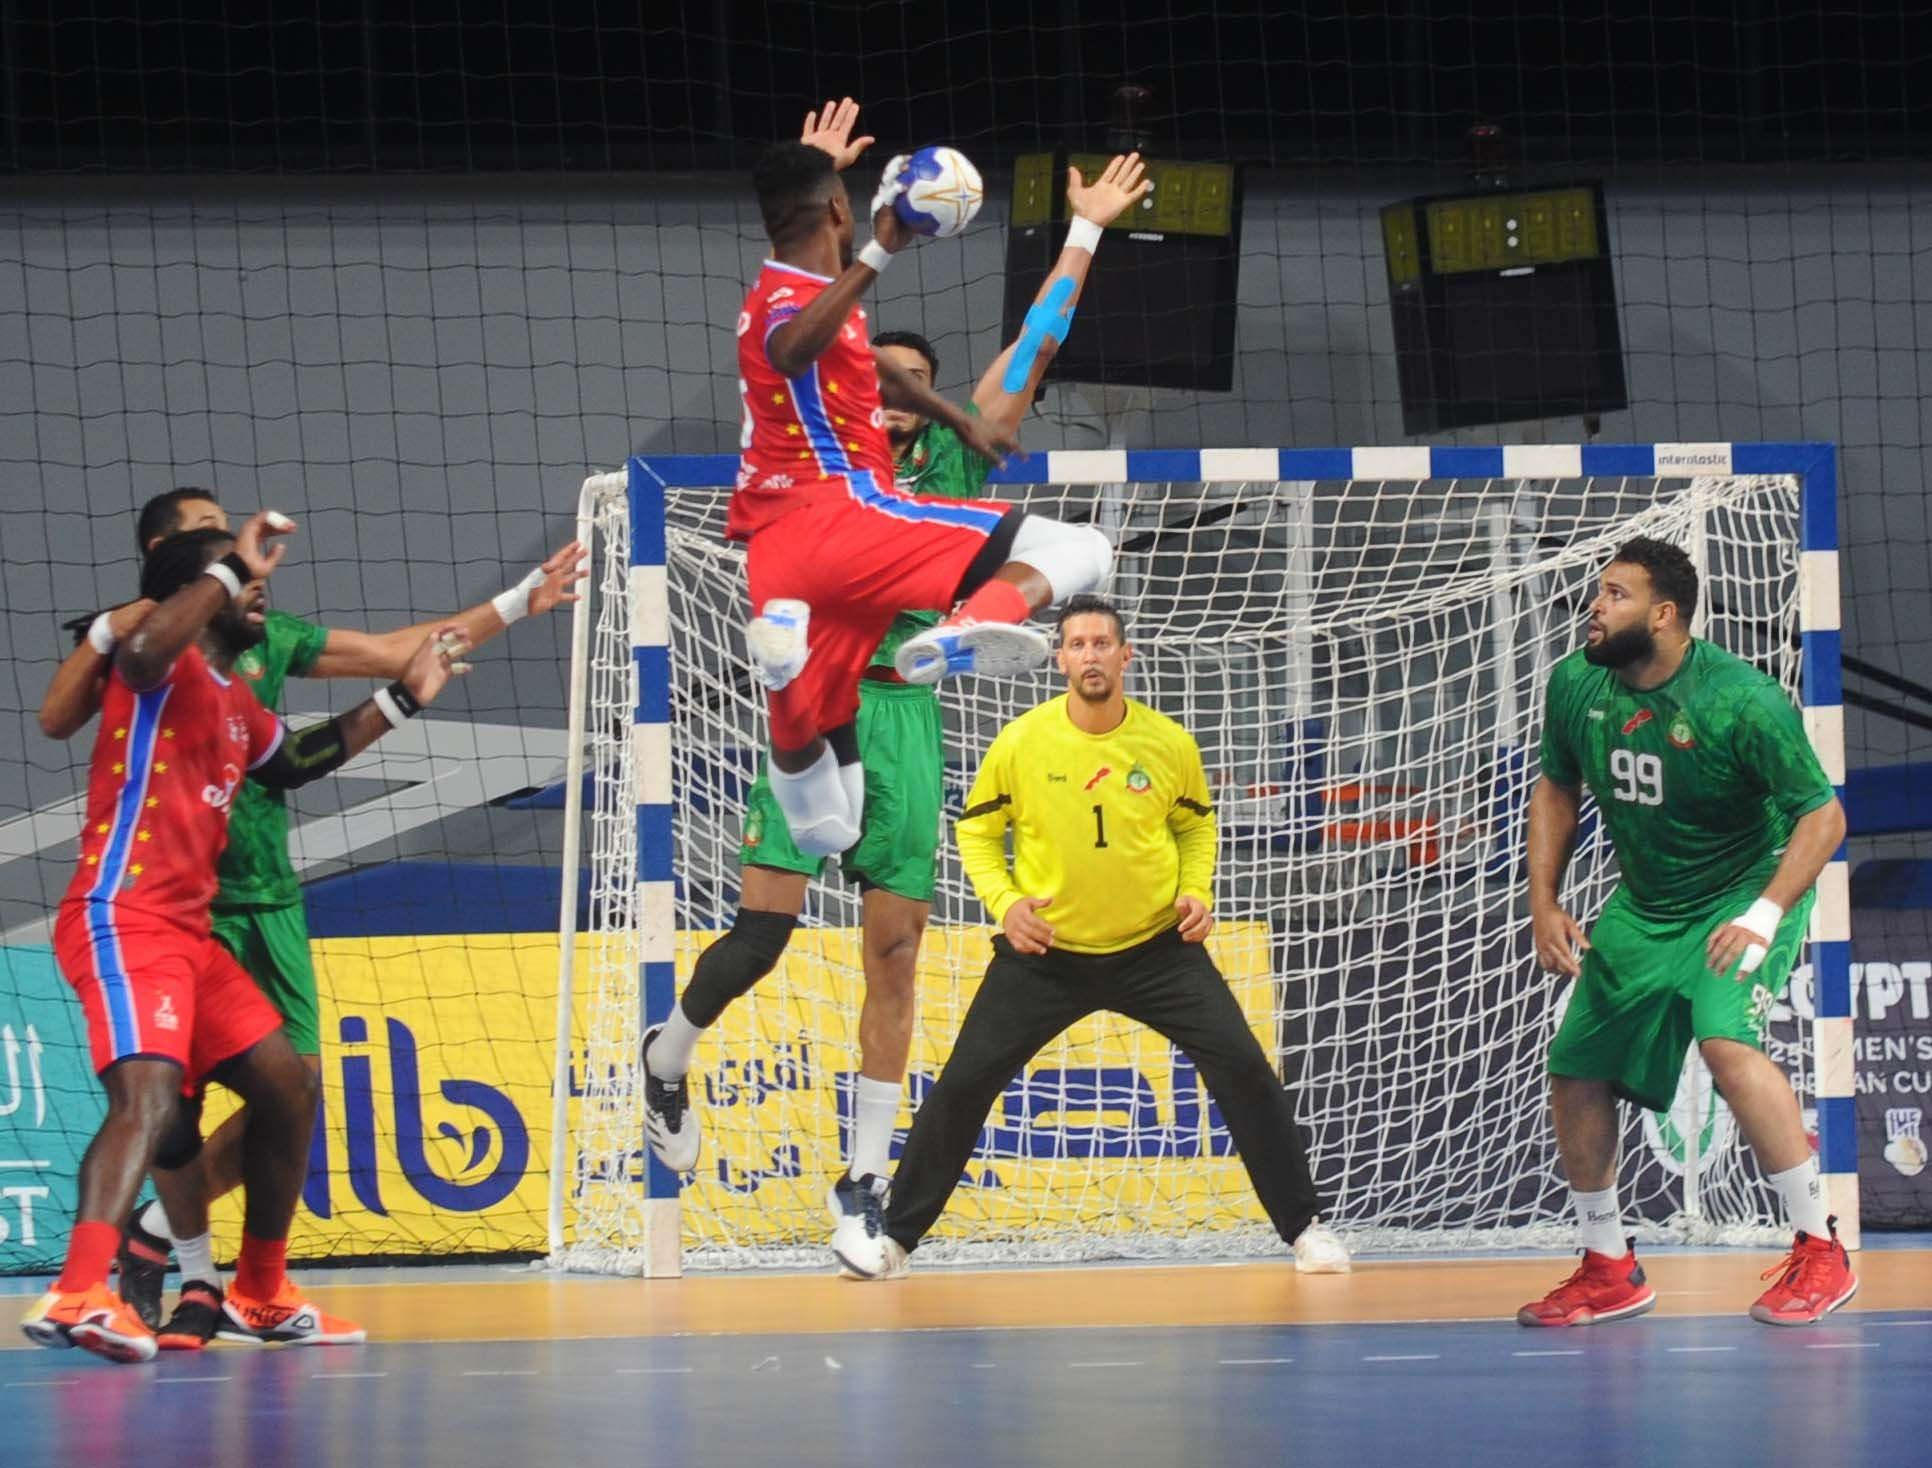 Cape Verde's win over Morocco meant they qualified for the African Men's Handball Championship final for the first time only two years after making their debut in the tournament ©CAHB